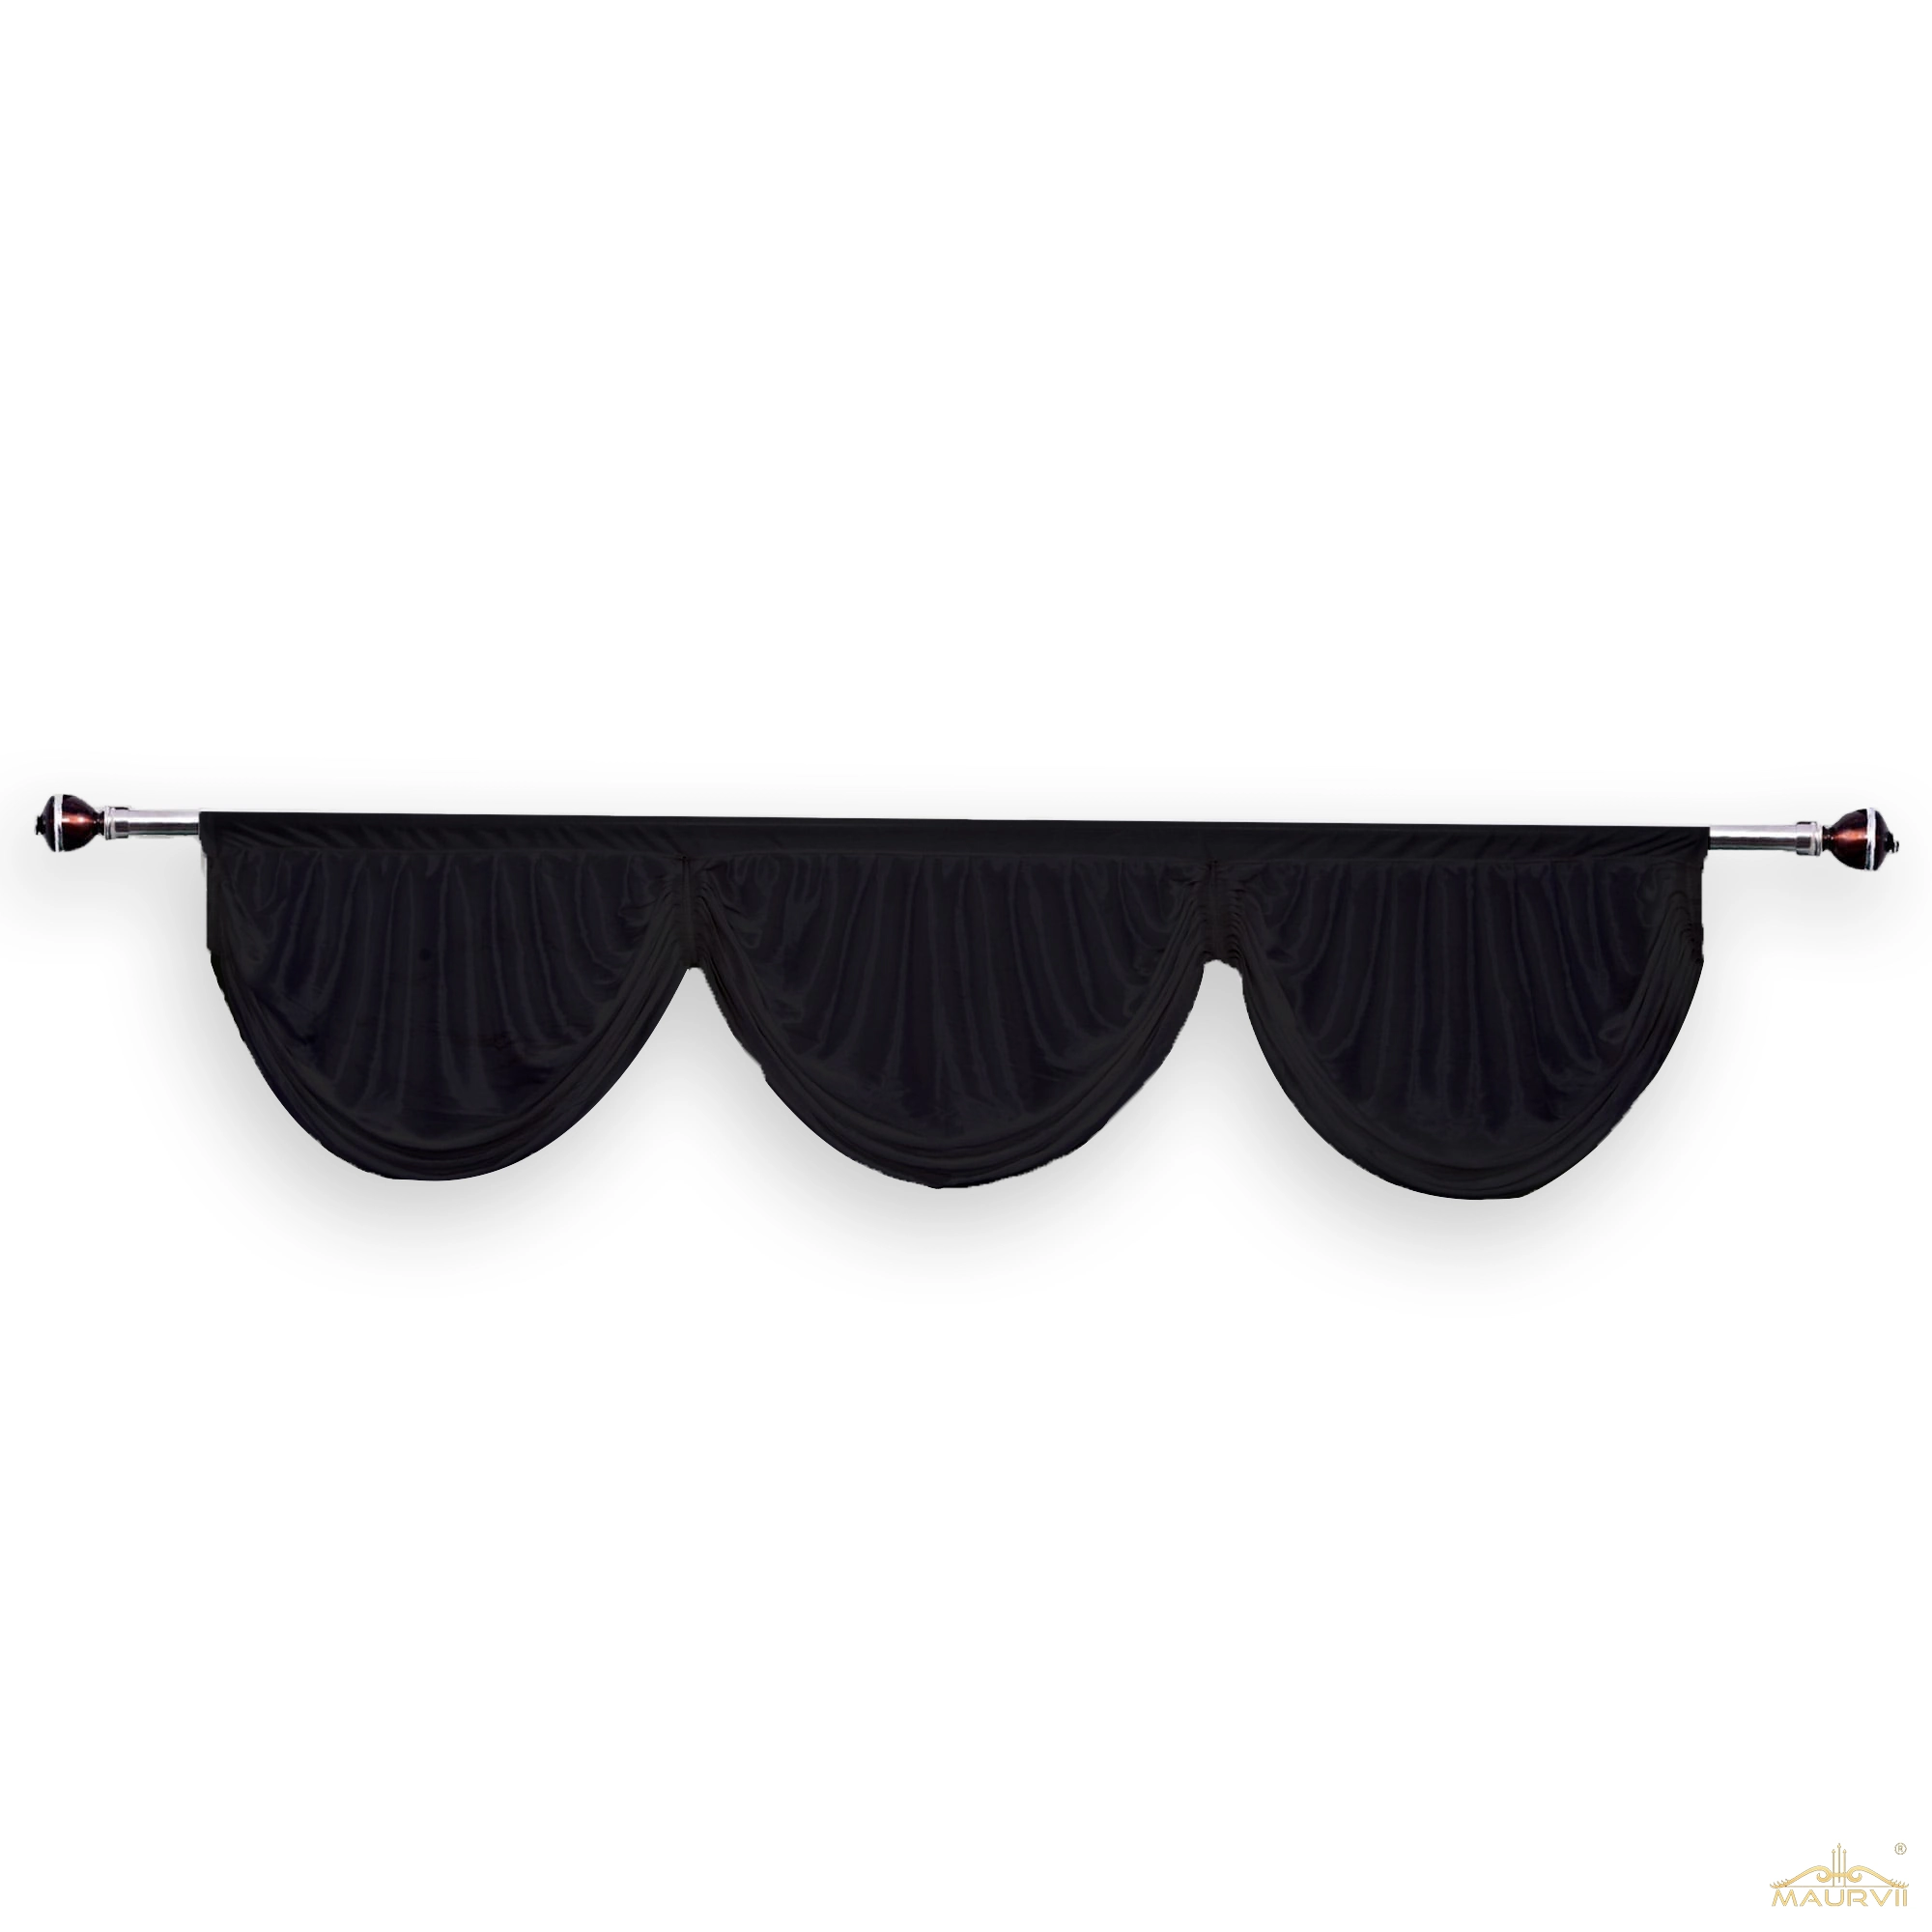 Black color swag valances are installed with curtain rod